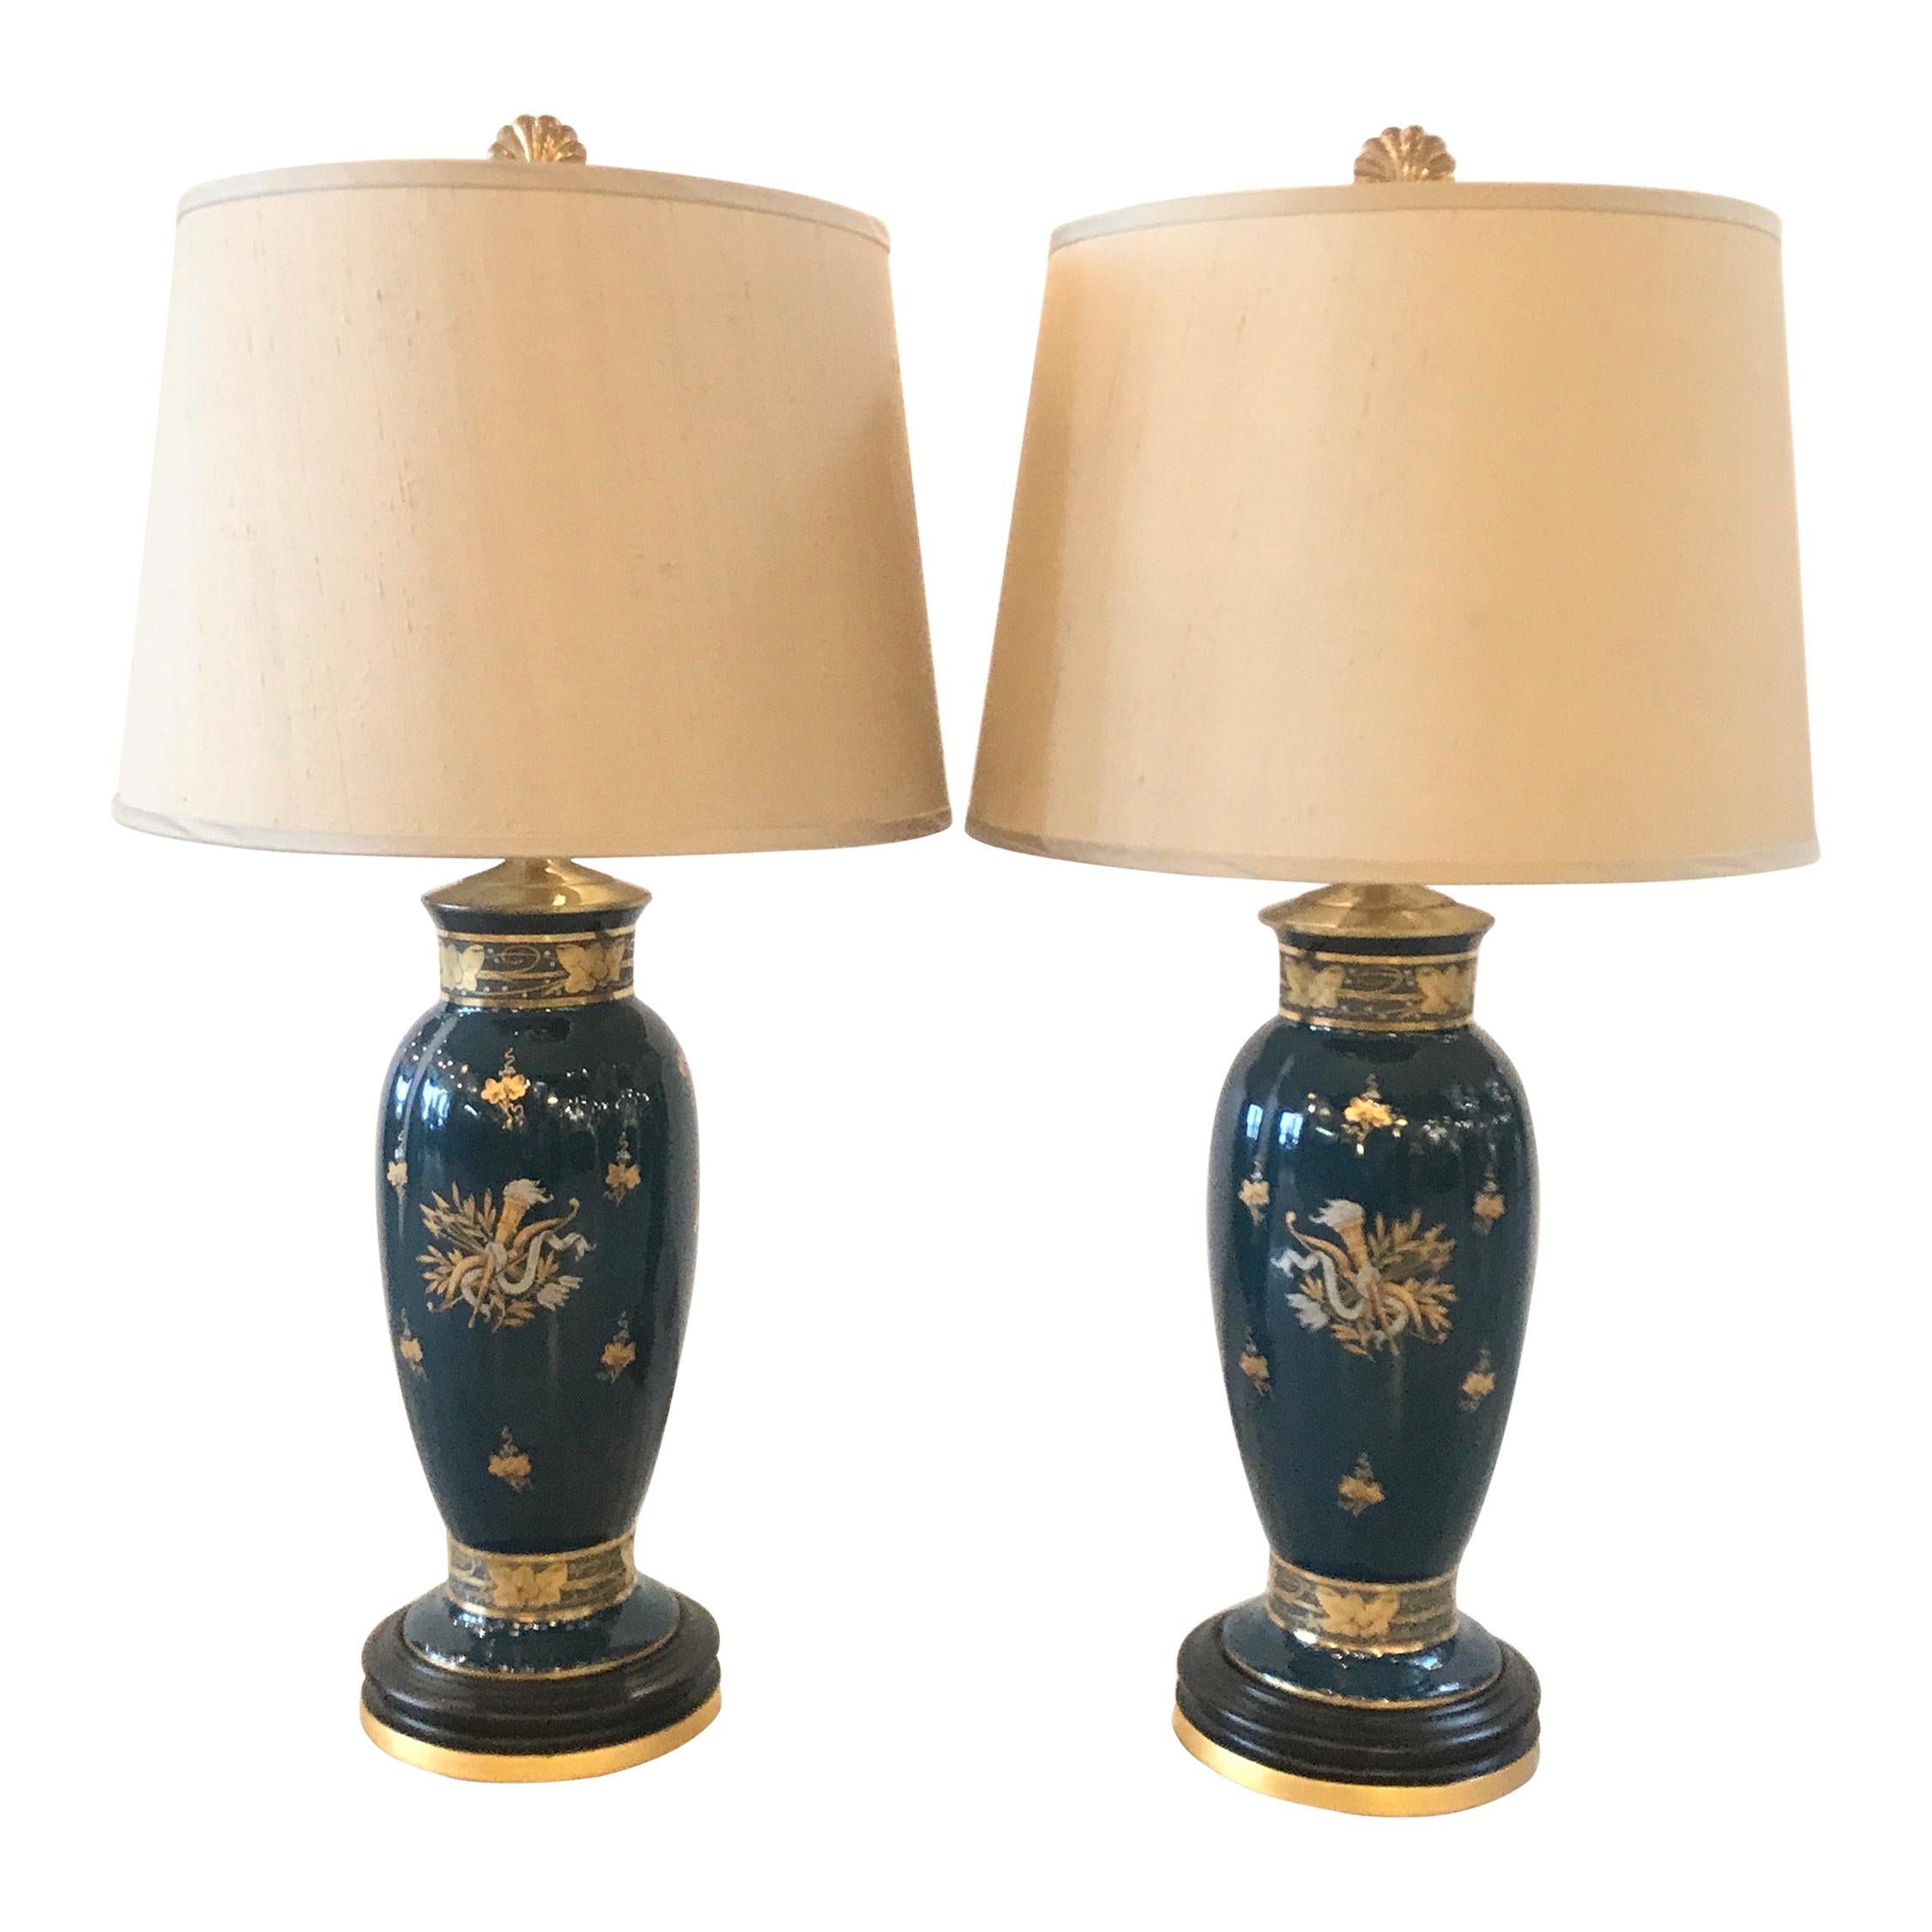 Pair of Gilt and Silvered Deep Teal Lamps